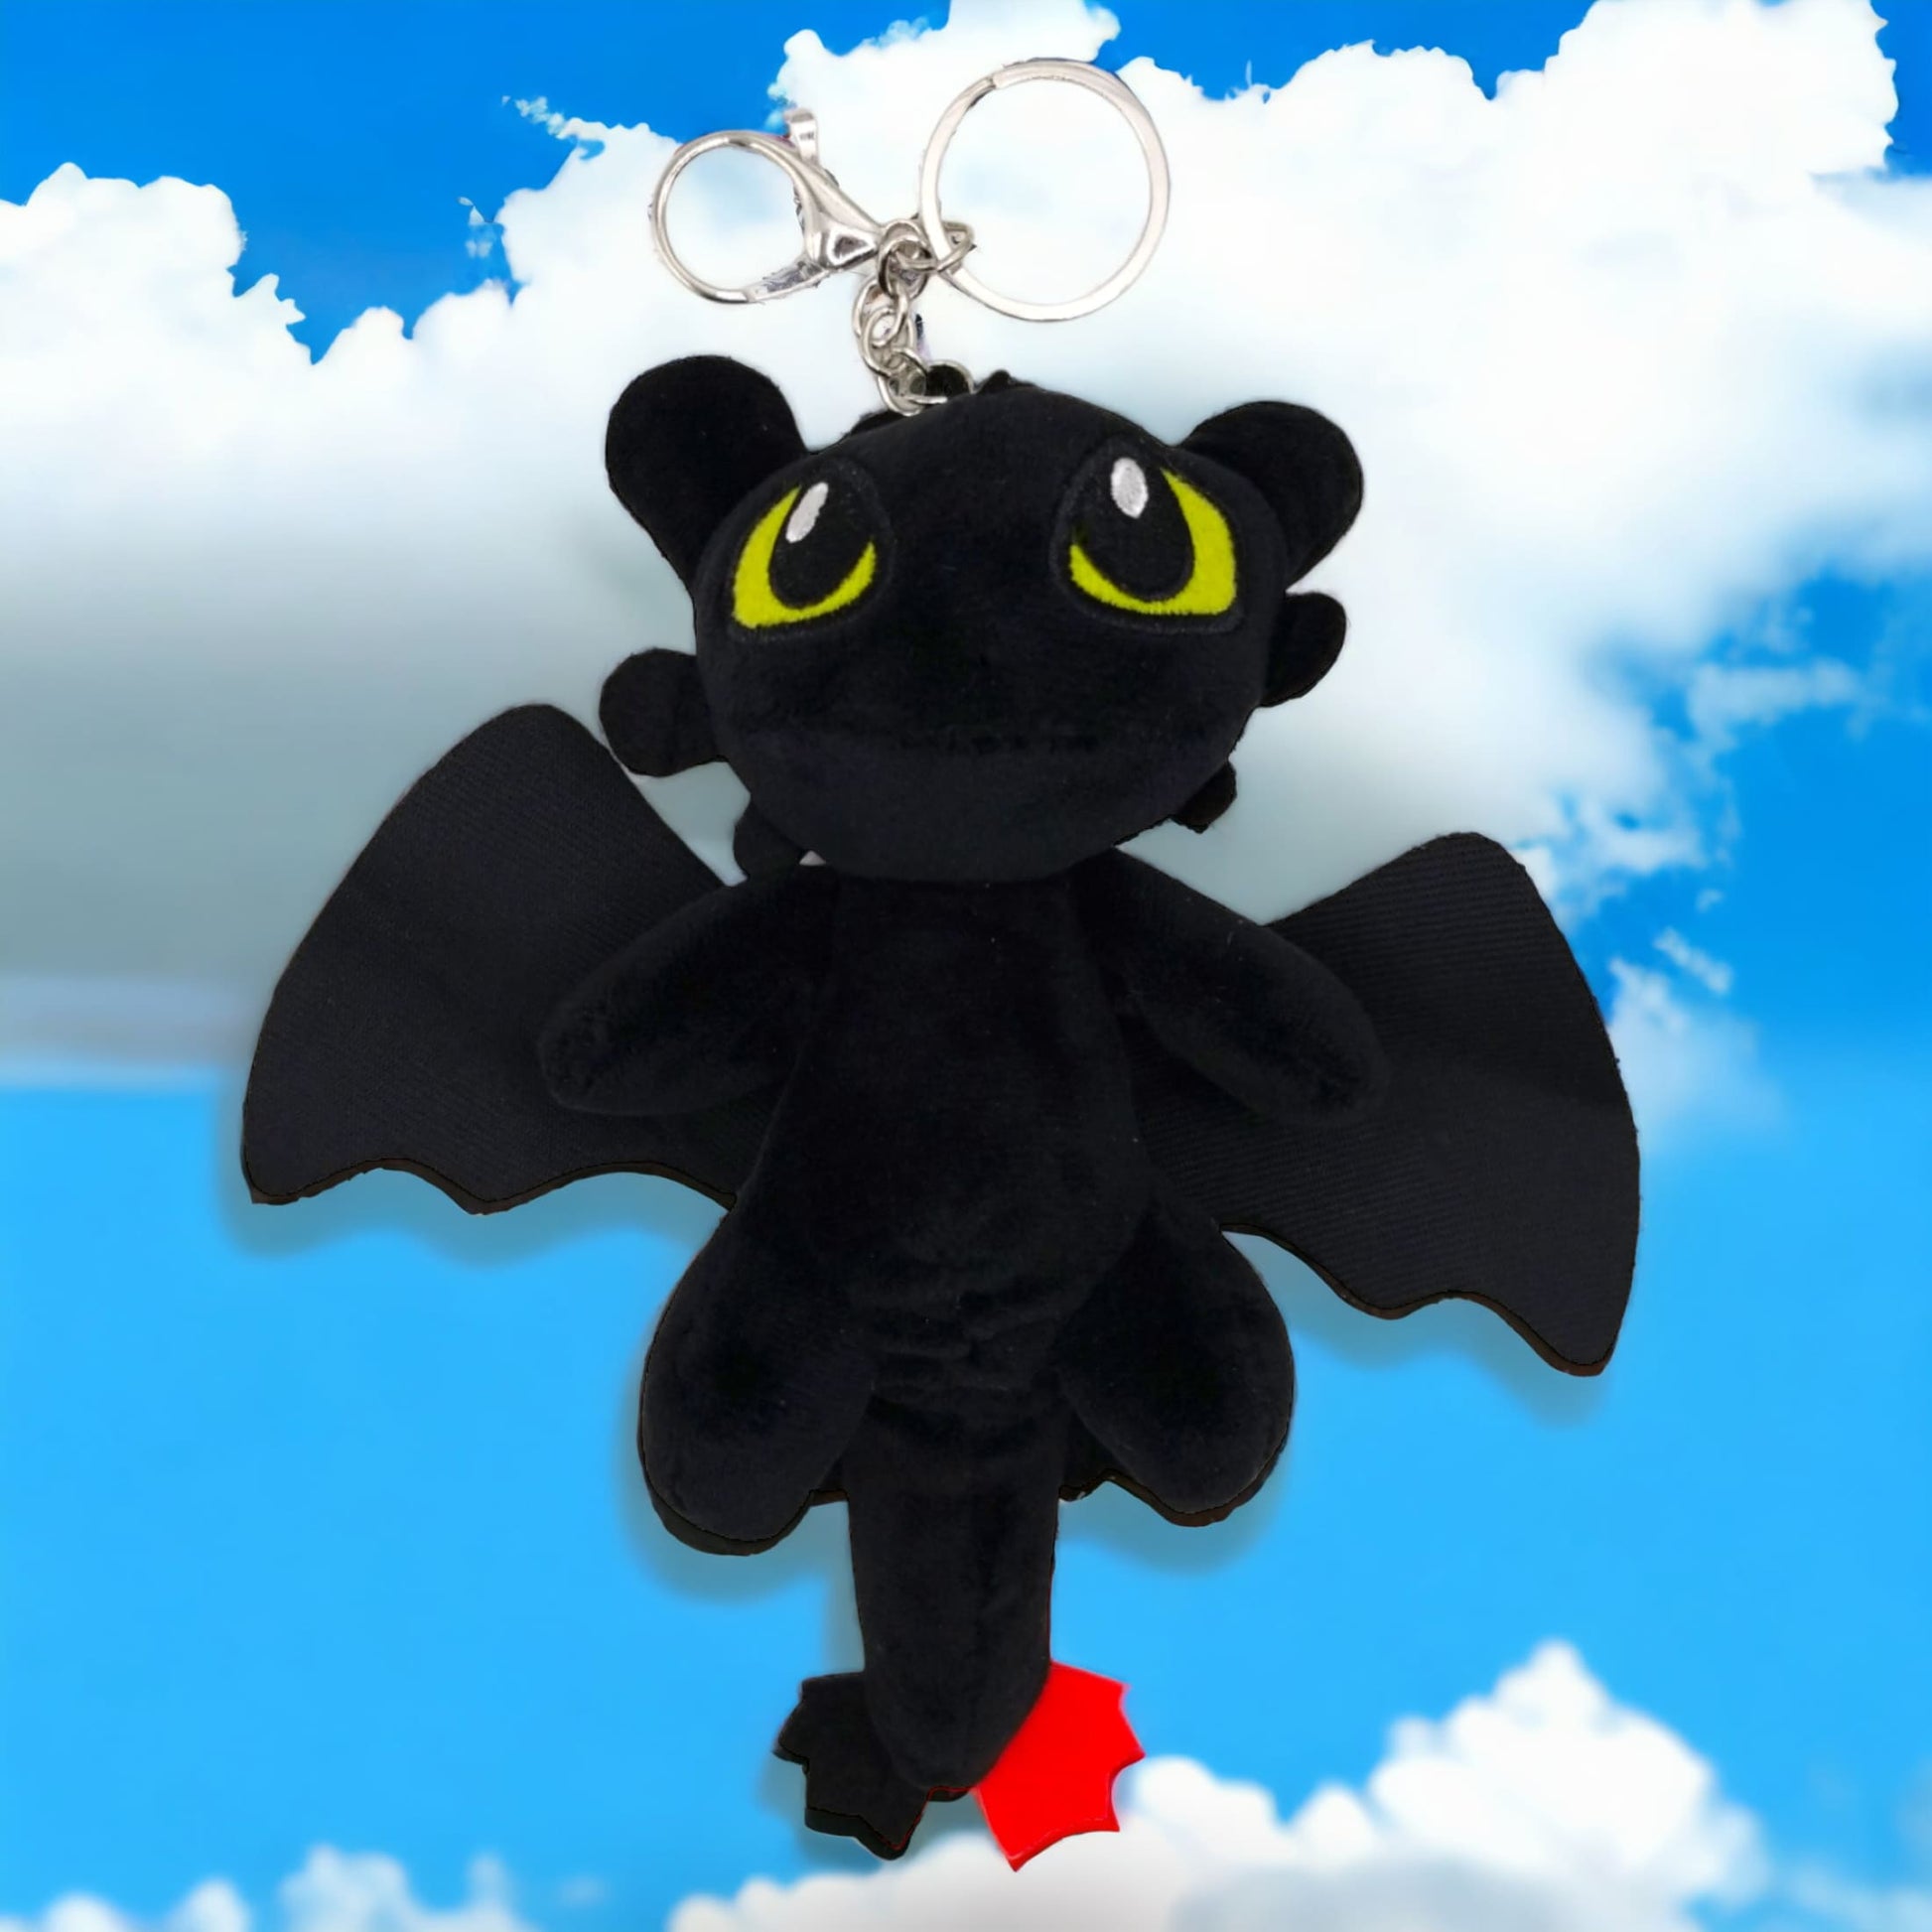 Toothless Dragon Mini Plush Keychain from Confetti Kitty, Only 14.99